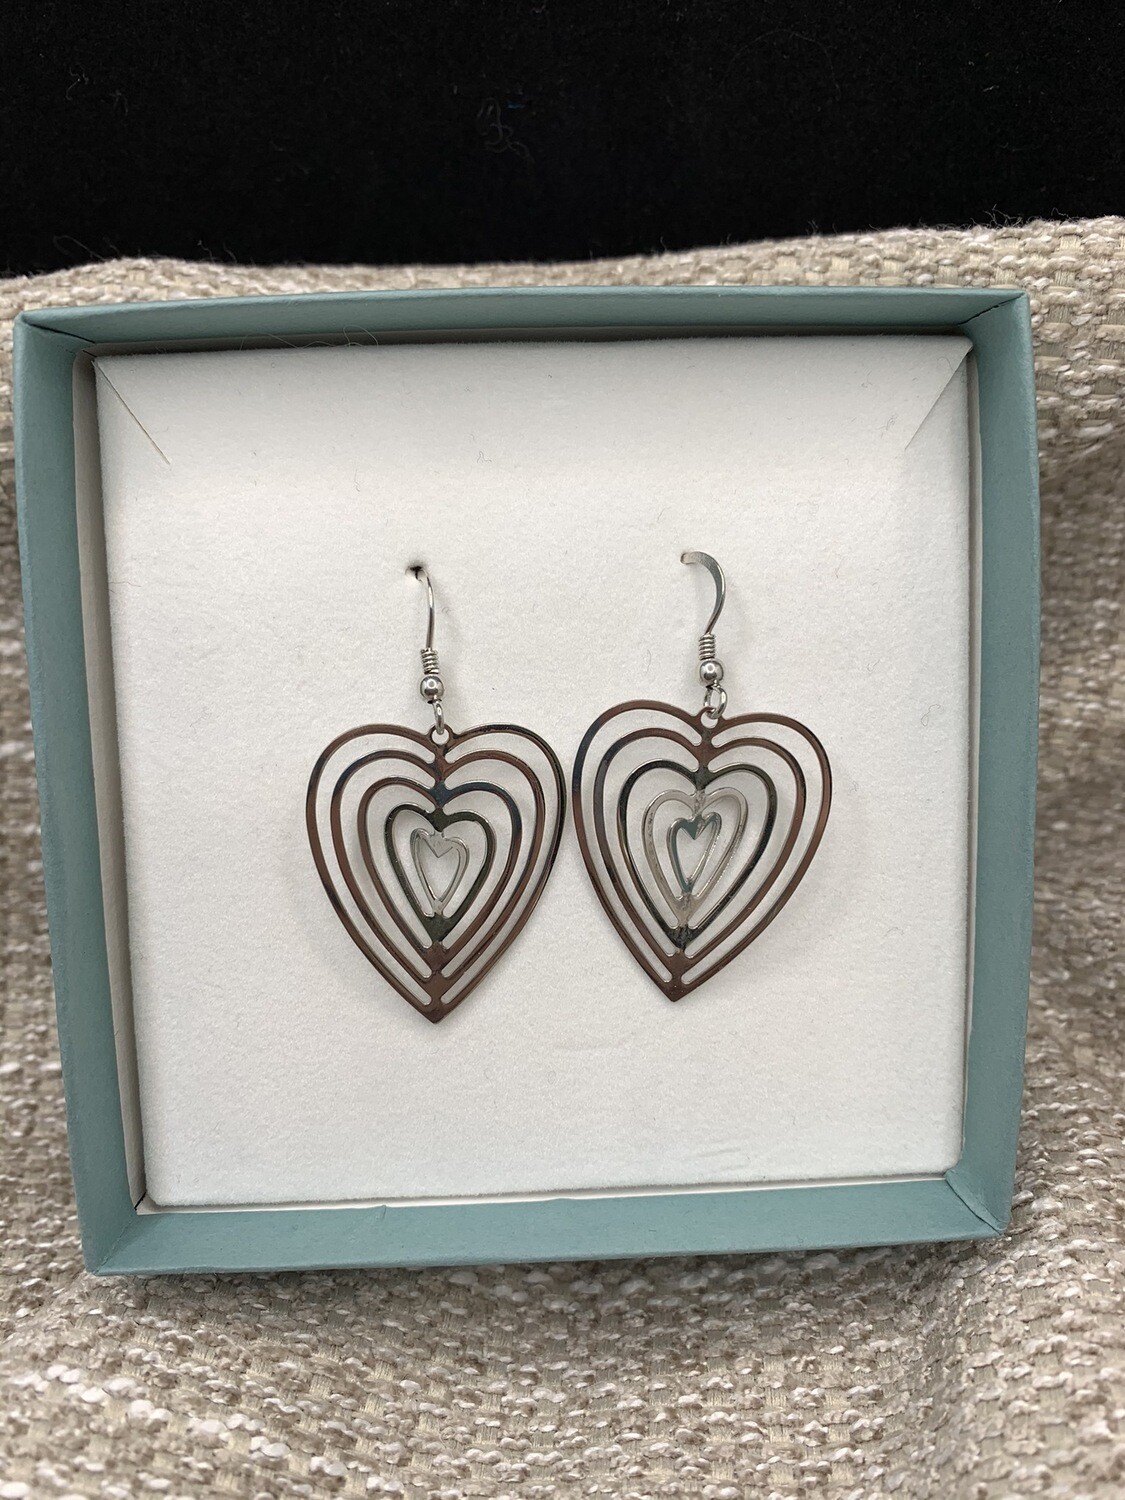 Concentric Hearts Sterling Silver Earrings